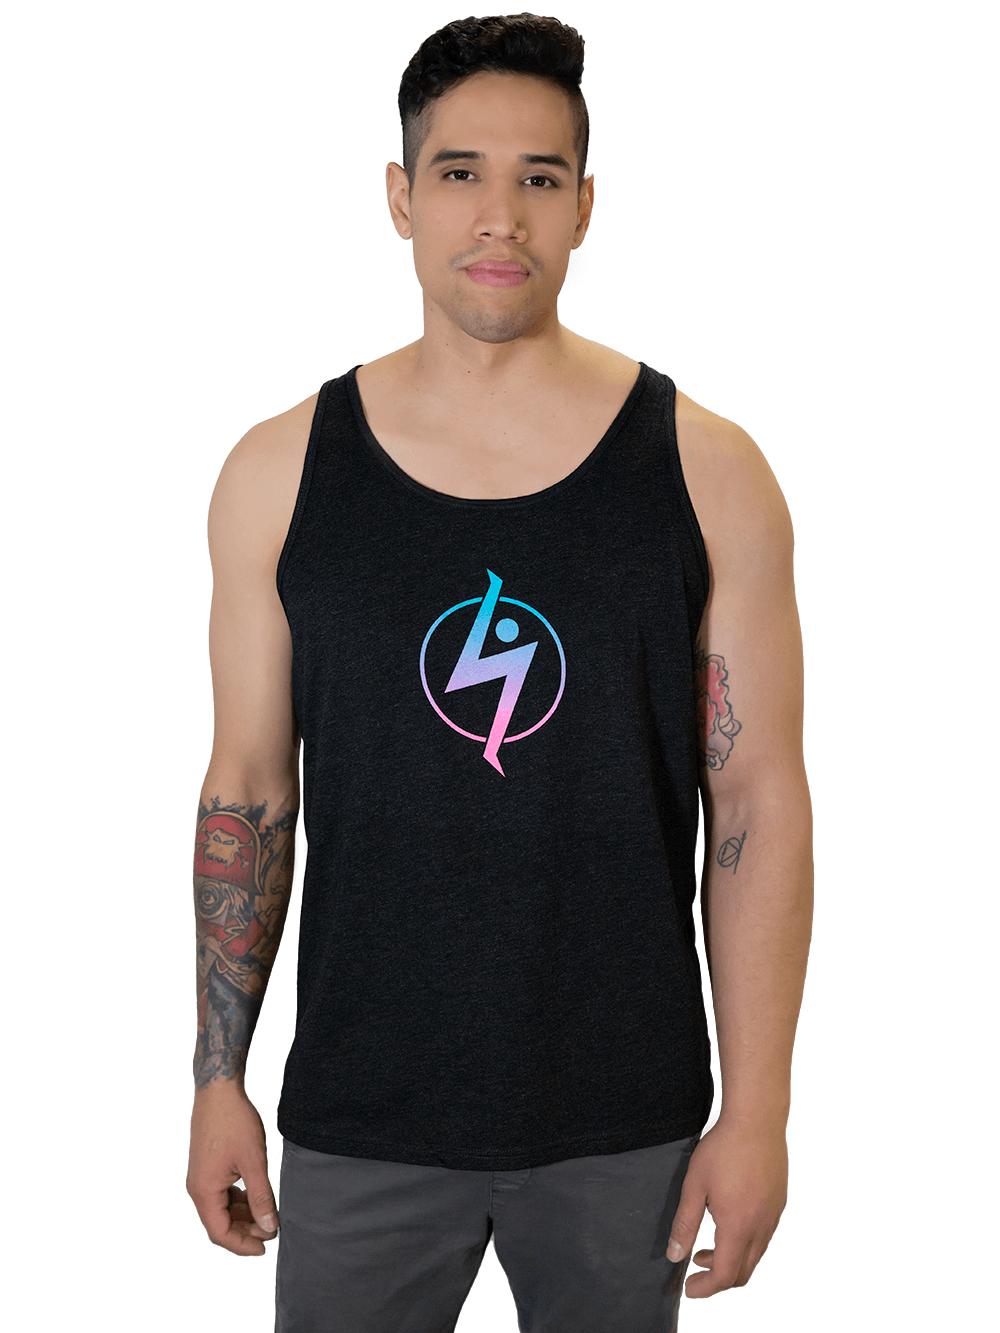 https://www.flashed.com/wp-content/uploads/2019/02/Bolt-Tank-Mens-Front-NEW-1.png